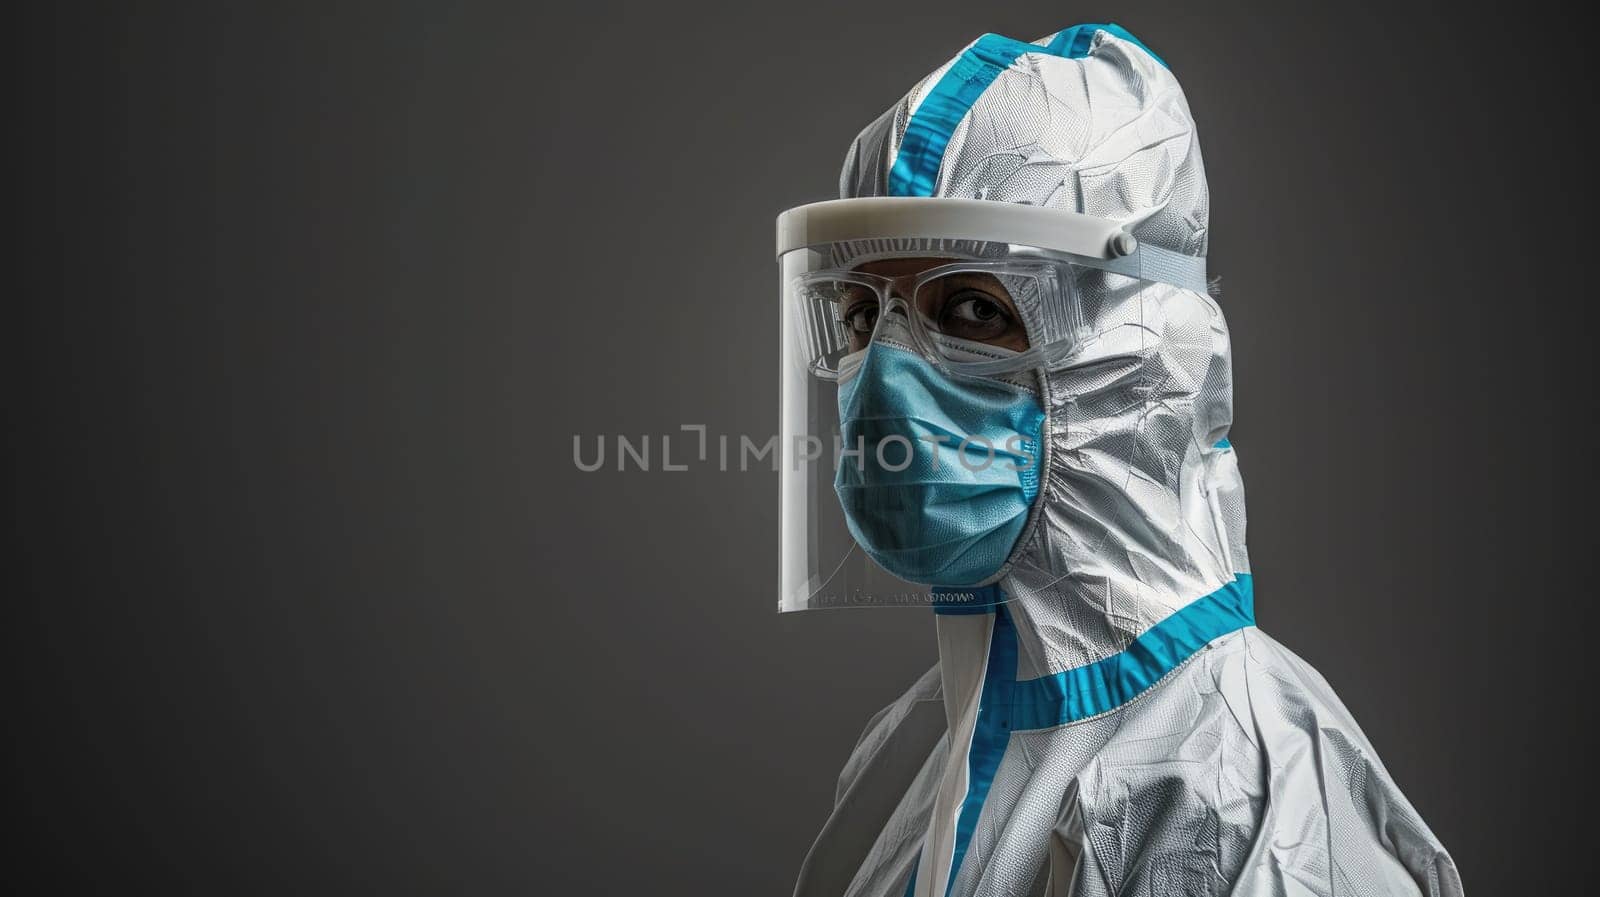 A medical worker in full personal protective gear, Confident medical professional. Medical theme.